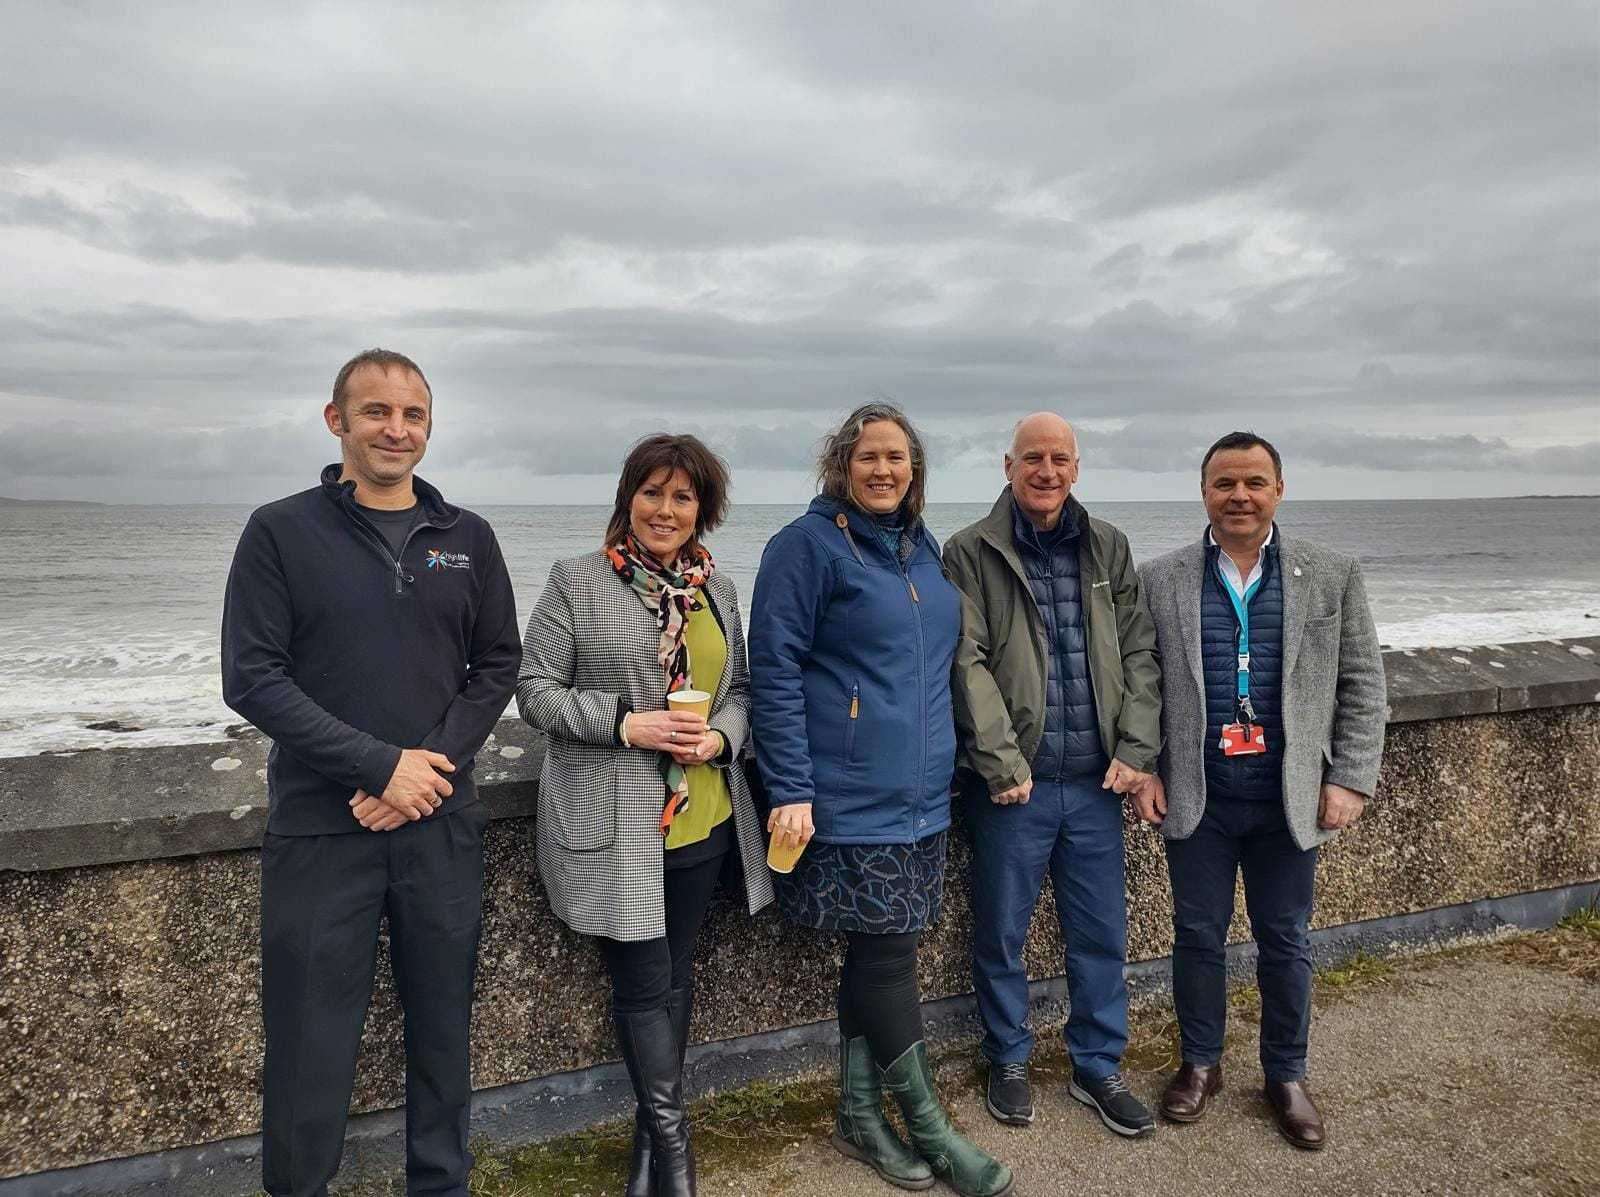 From left: Richard Hanna (Leisure centre manager), Jane Urquhart, Amelia Williamson and Stewart Duncan from Nairn Beach Wheelchairs and Steve Walsh Chief Executive of High Life Highland. Picture: Nairn Beach Wheelchairs/Nicola McAlley.